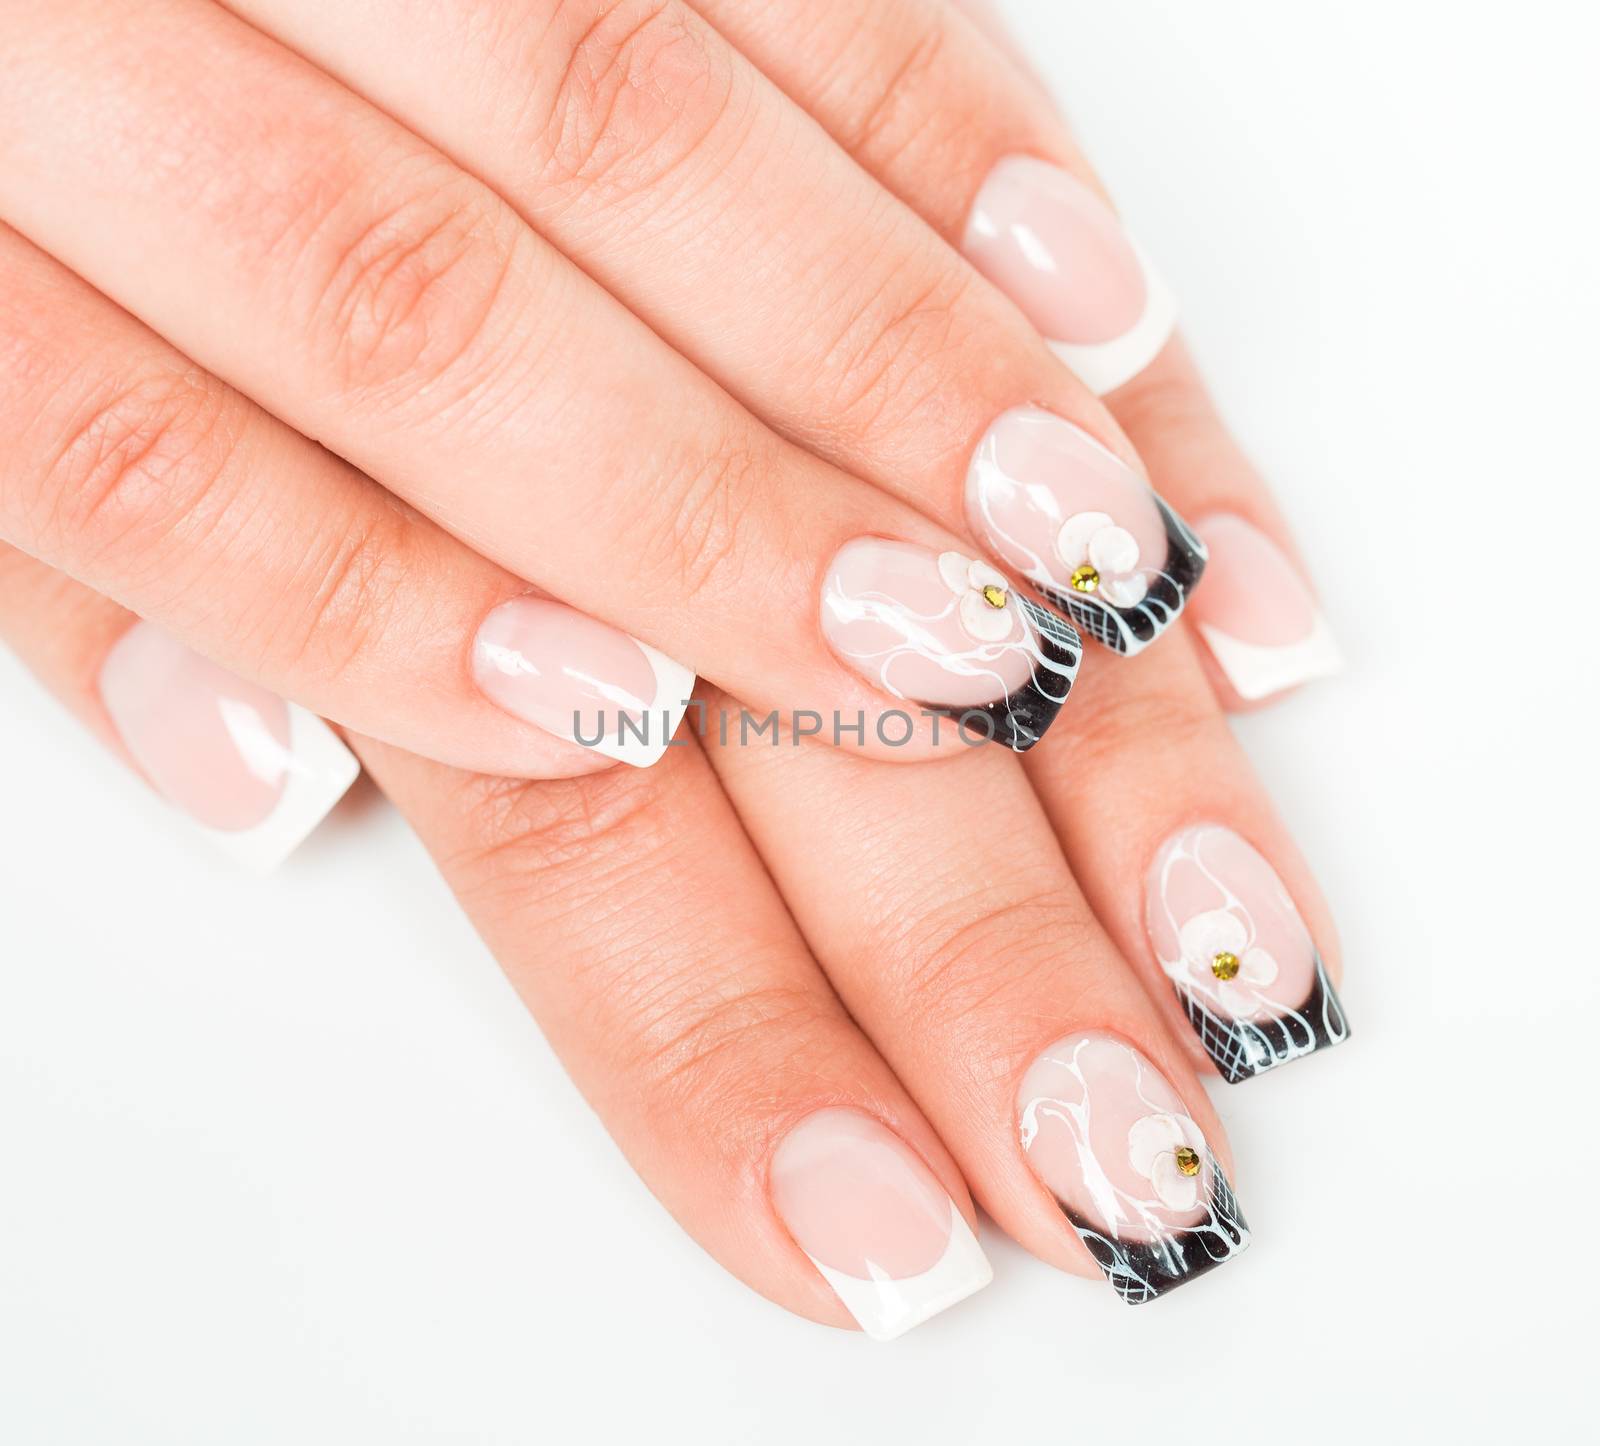 Beautiful hands with manicure on a light background by vlad_star